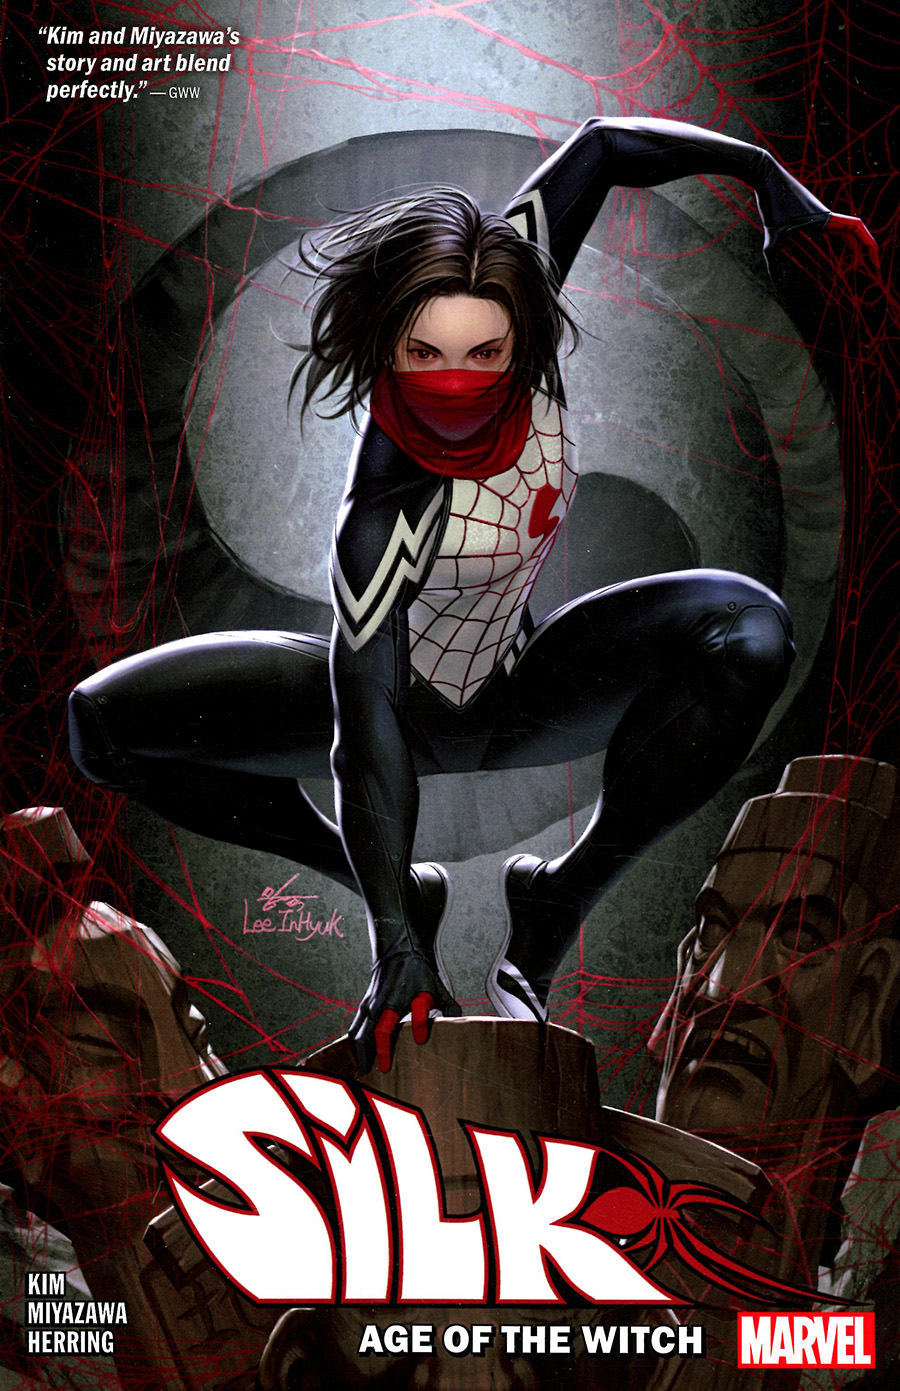 Silk (2021) Vol 2 Age Of The Witch TP